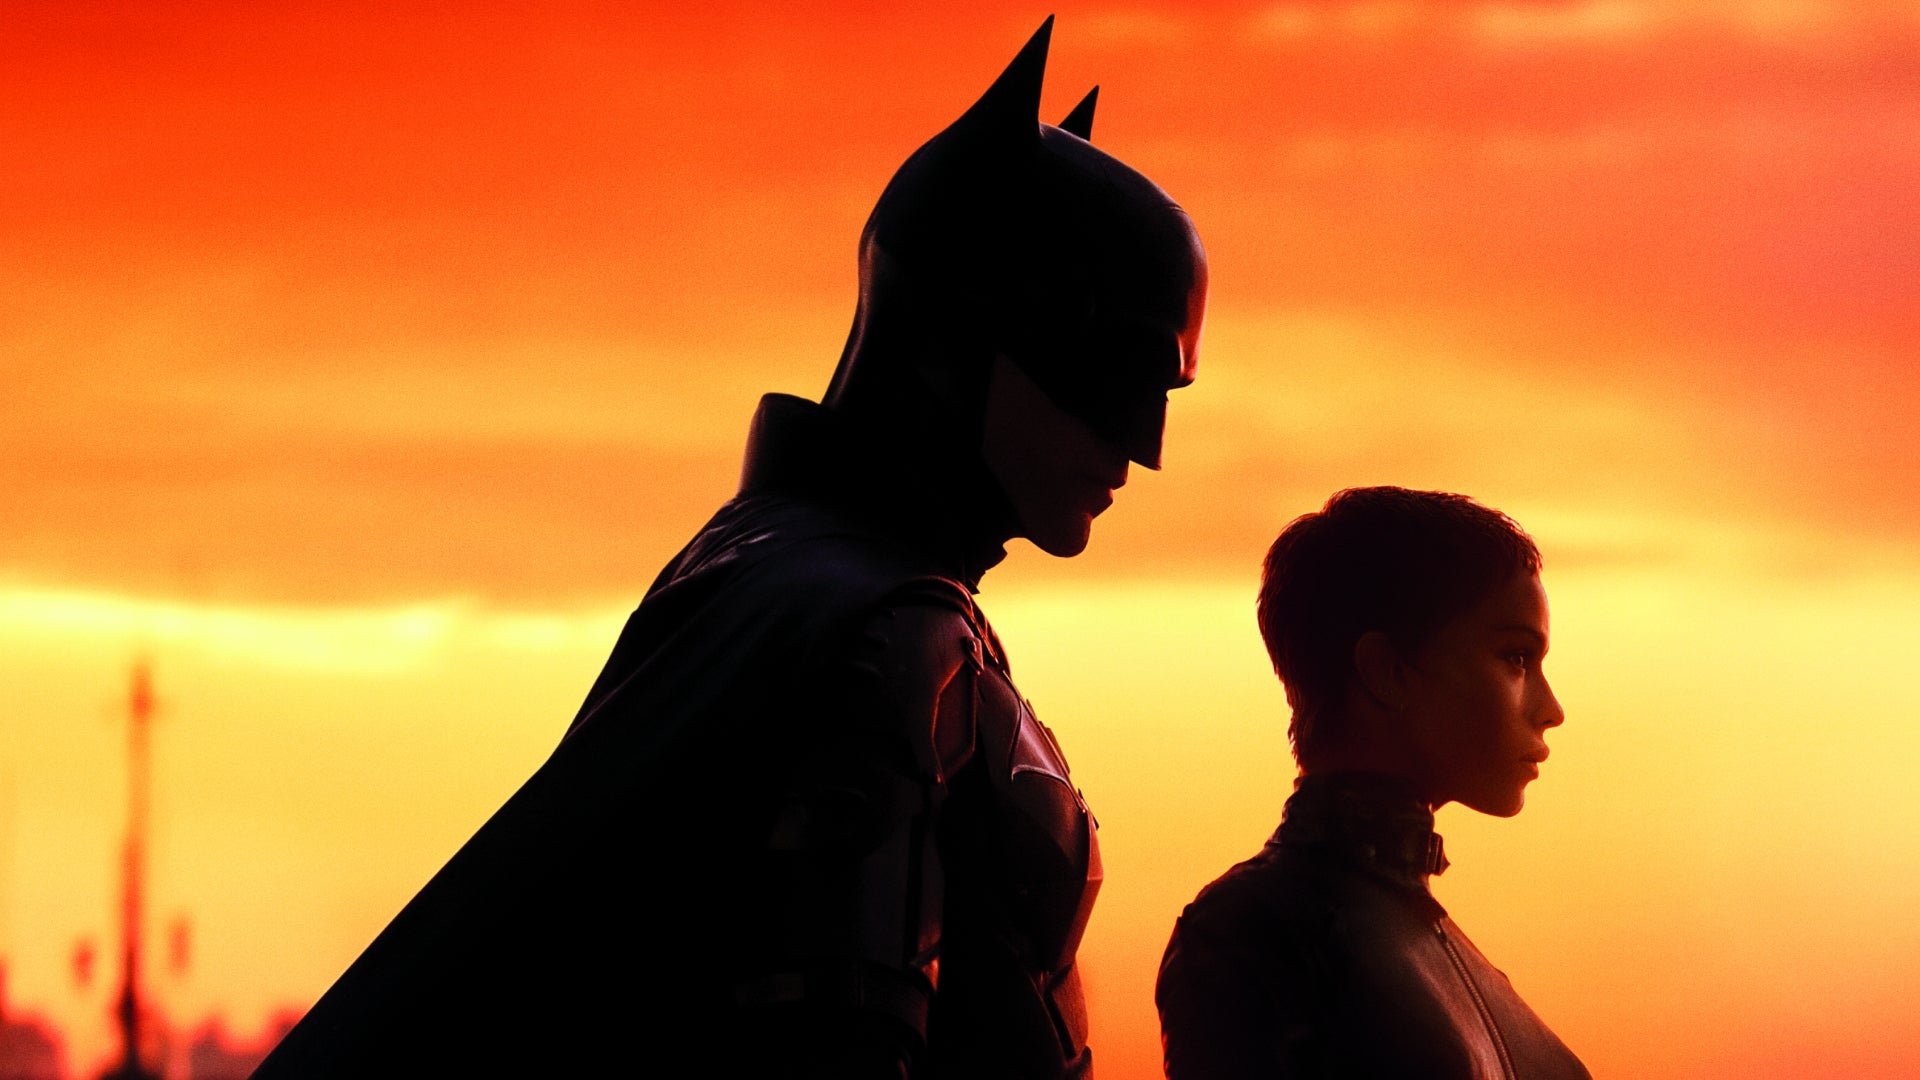 The Batman has box office collections of $750 million